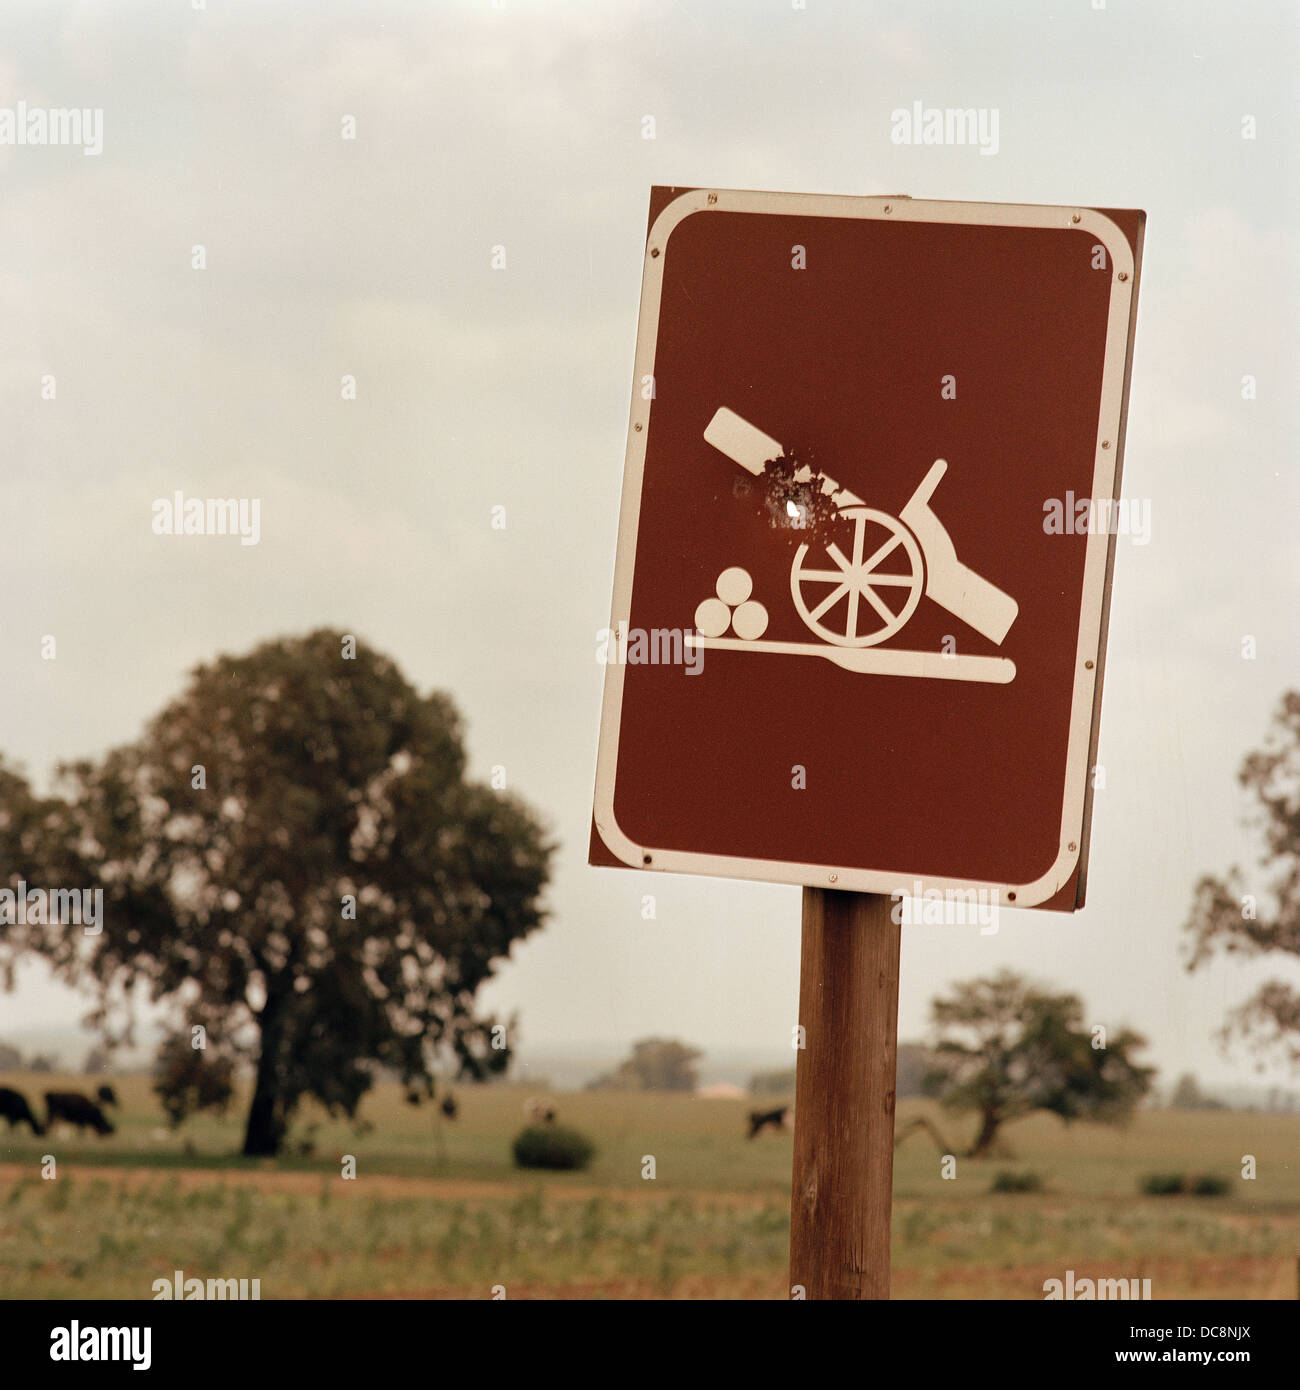 South Africa, Koppies, 2009. A heritage site signpost has a bullet hole through a canon image. Stock Photo